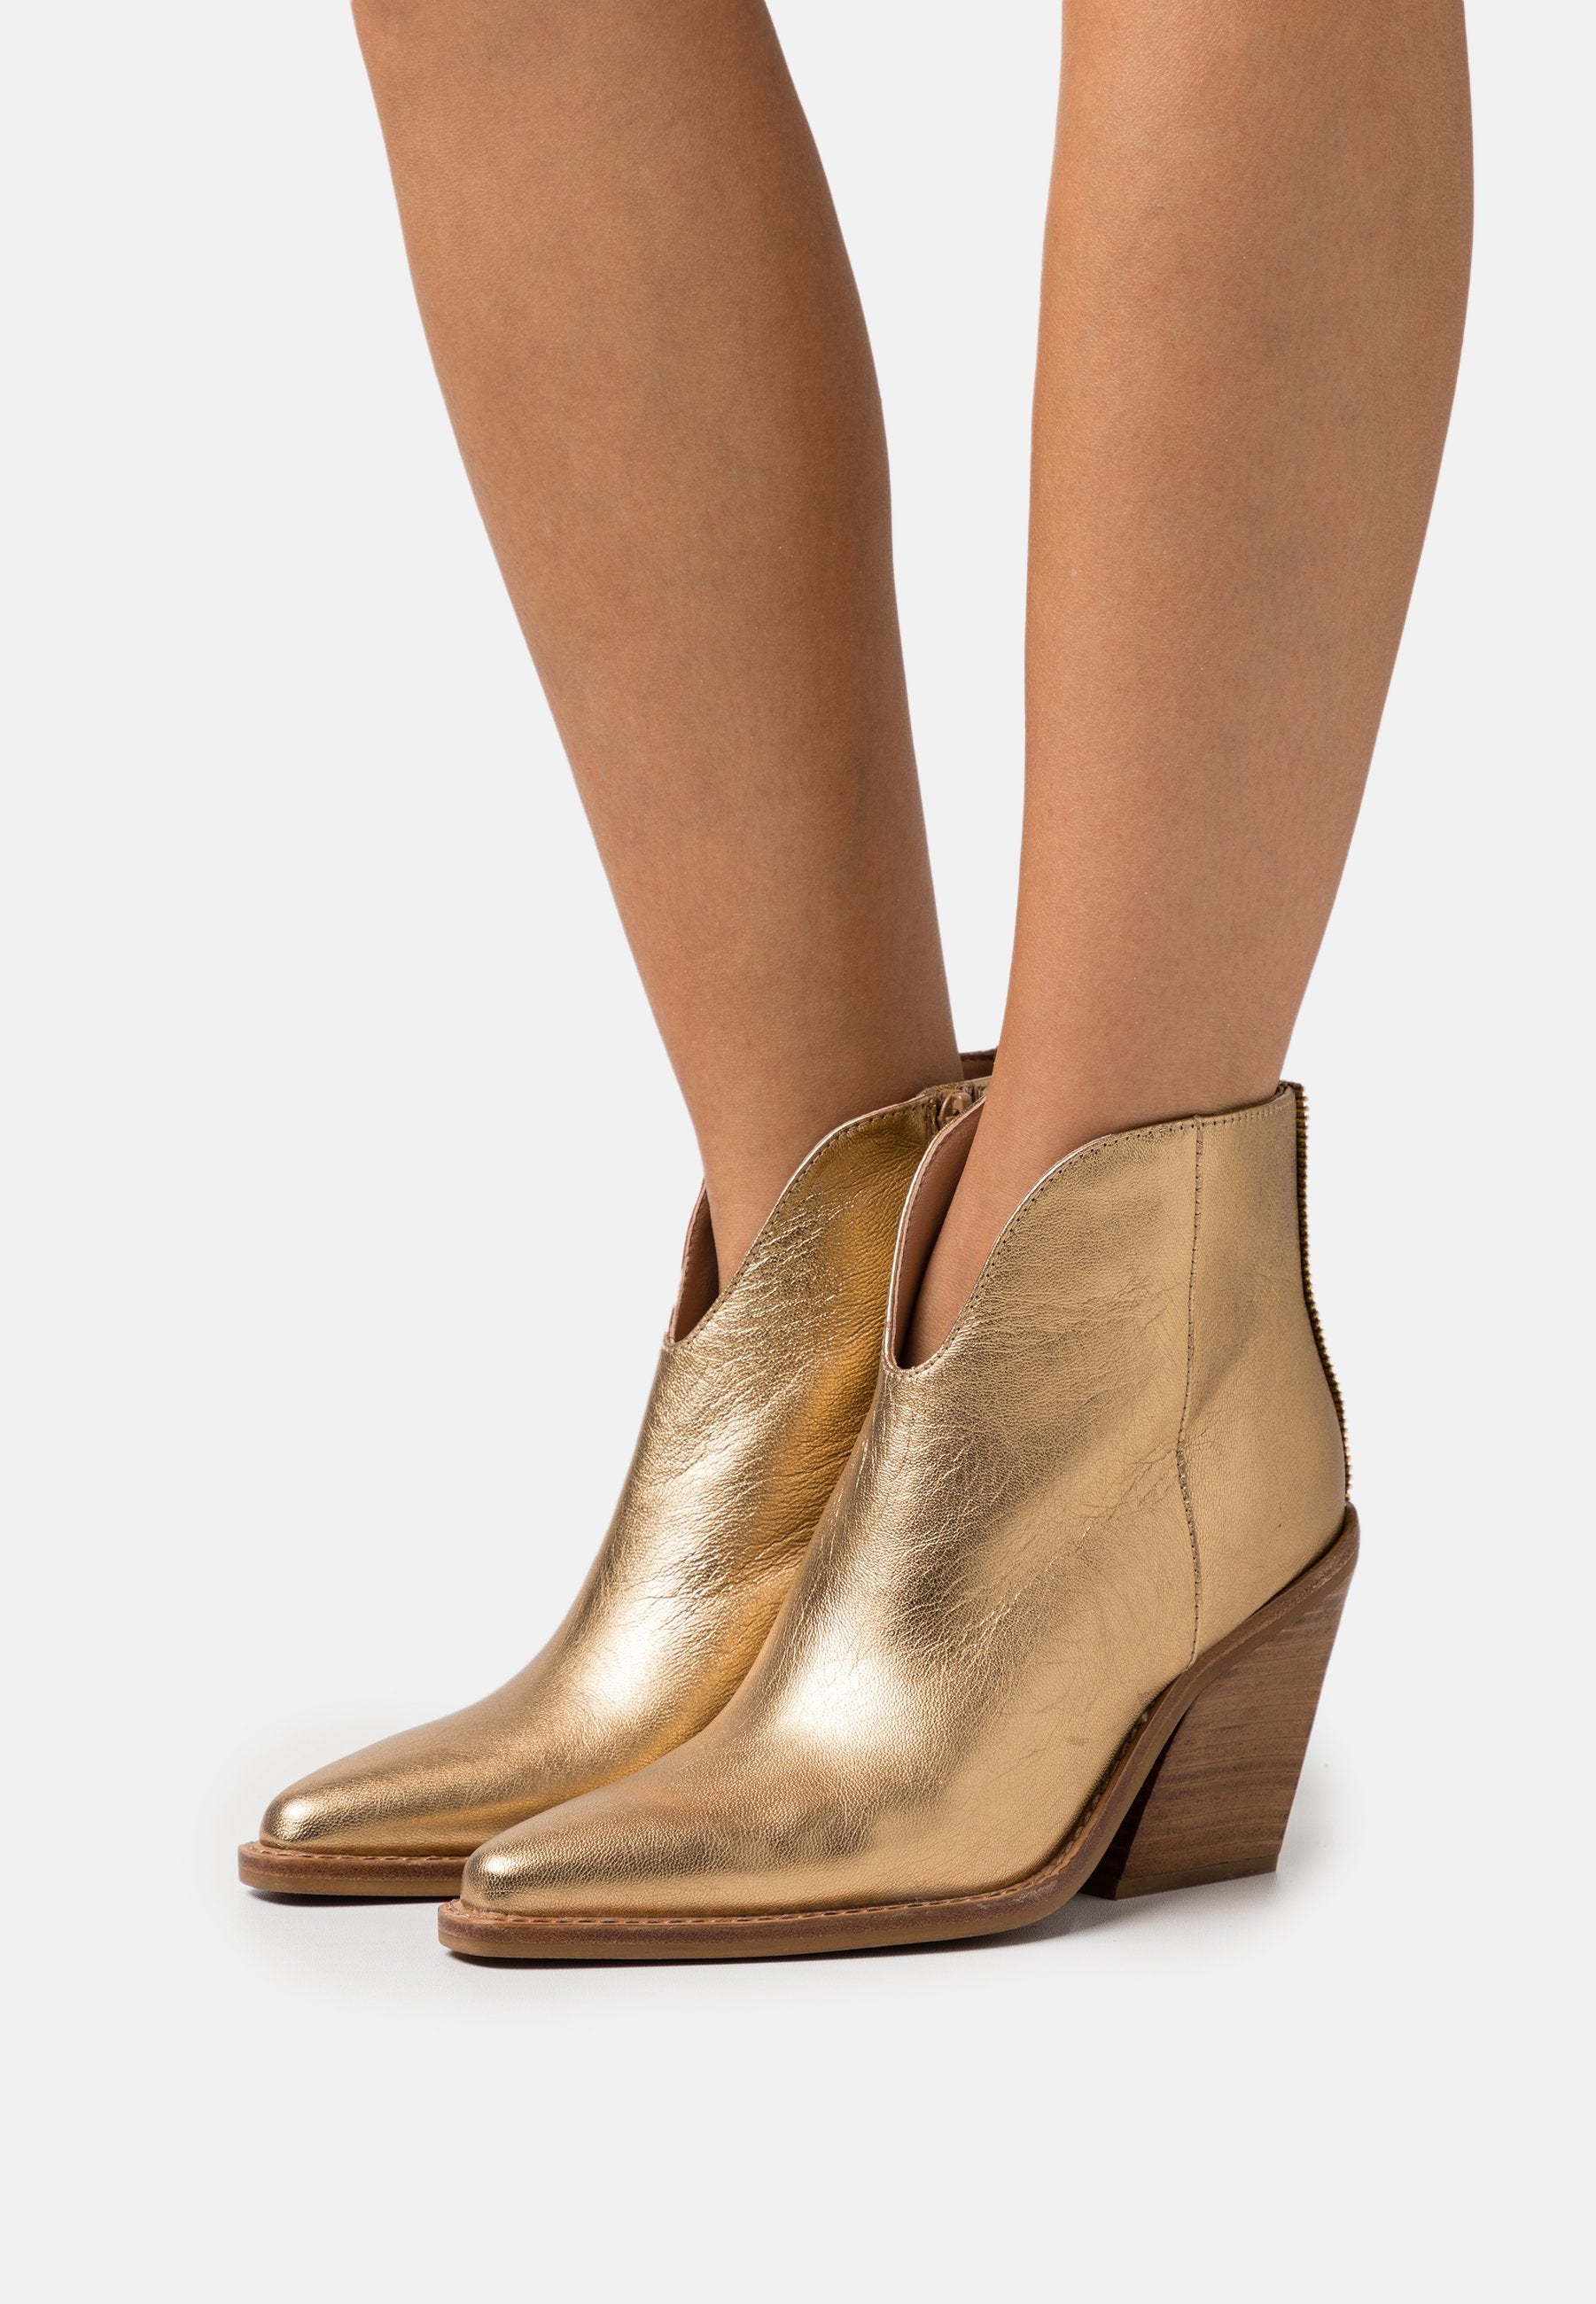 New Kole Gold Low Ankle Boots 34265-M-103 - 2